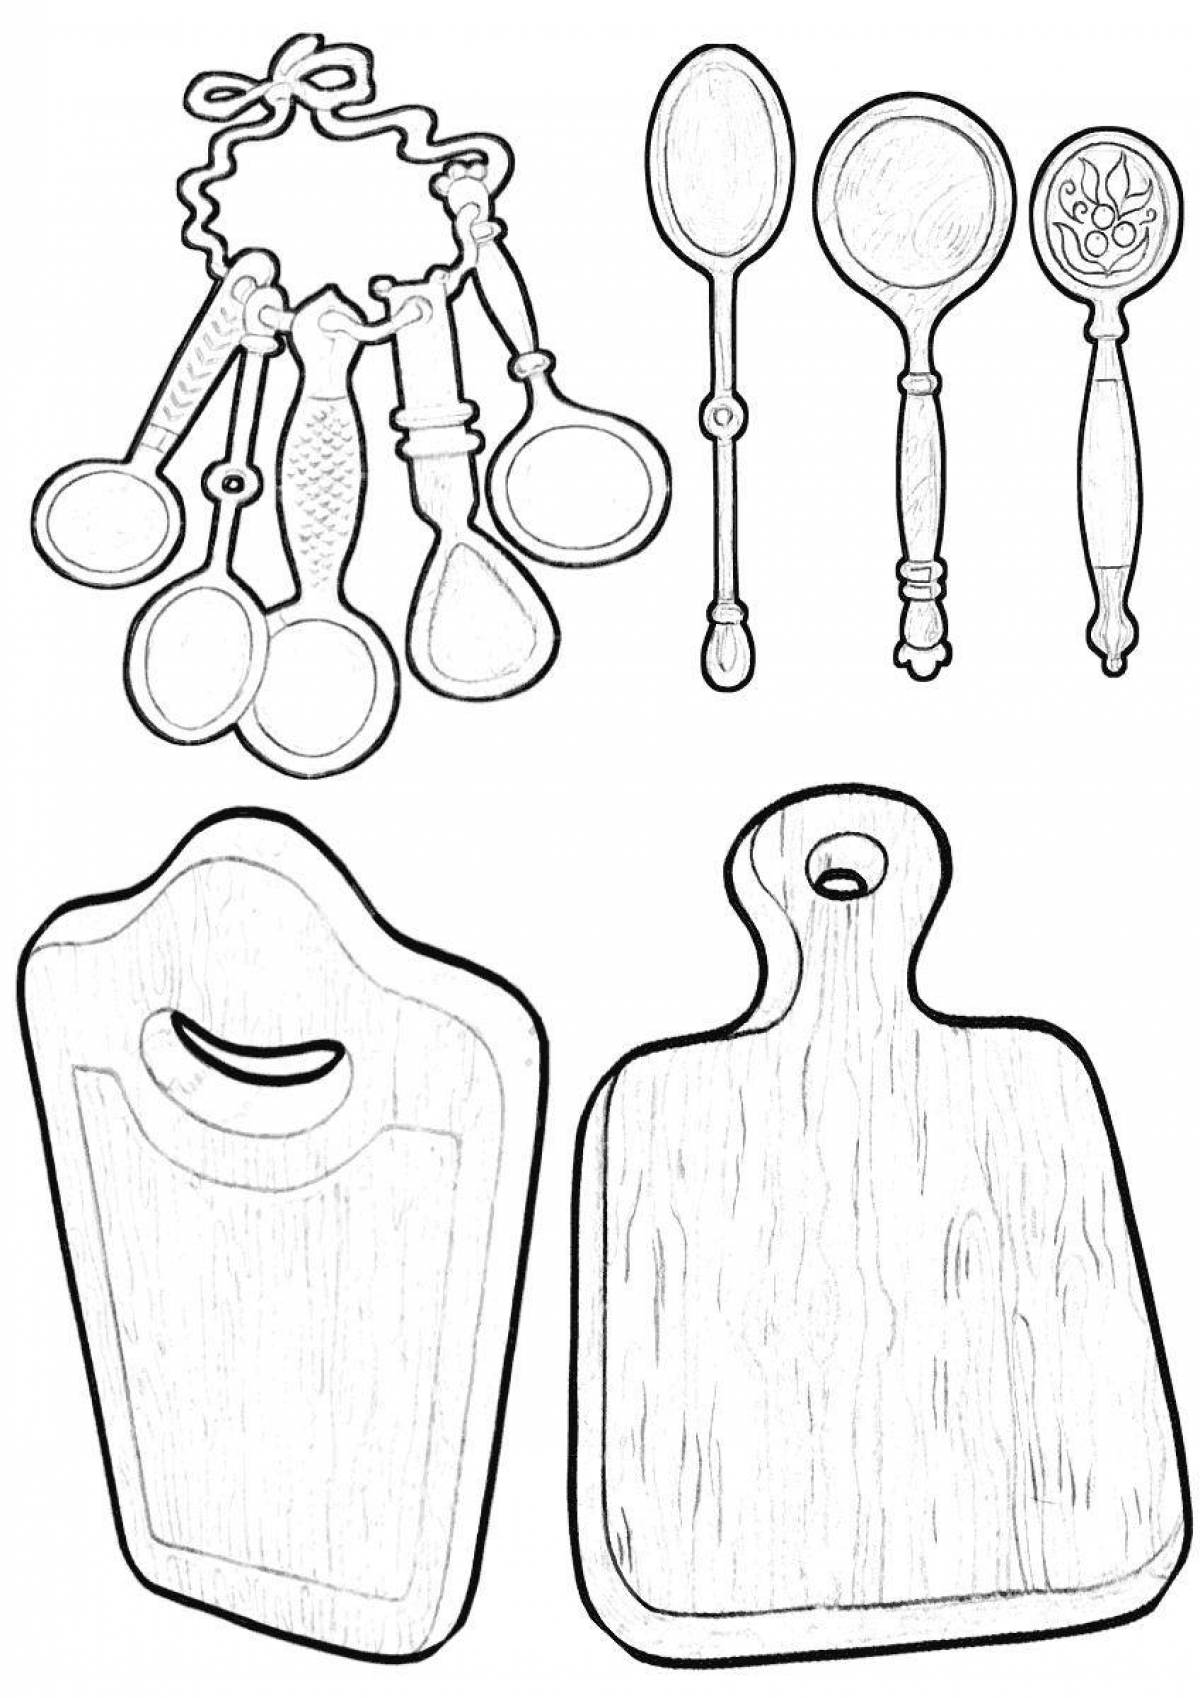 Chopping board color-explosion coloring page